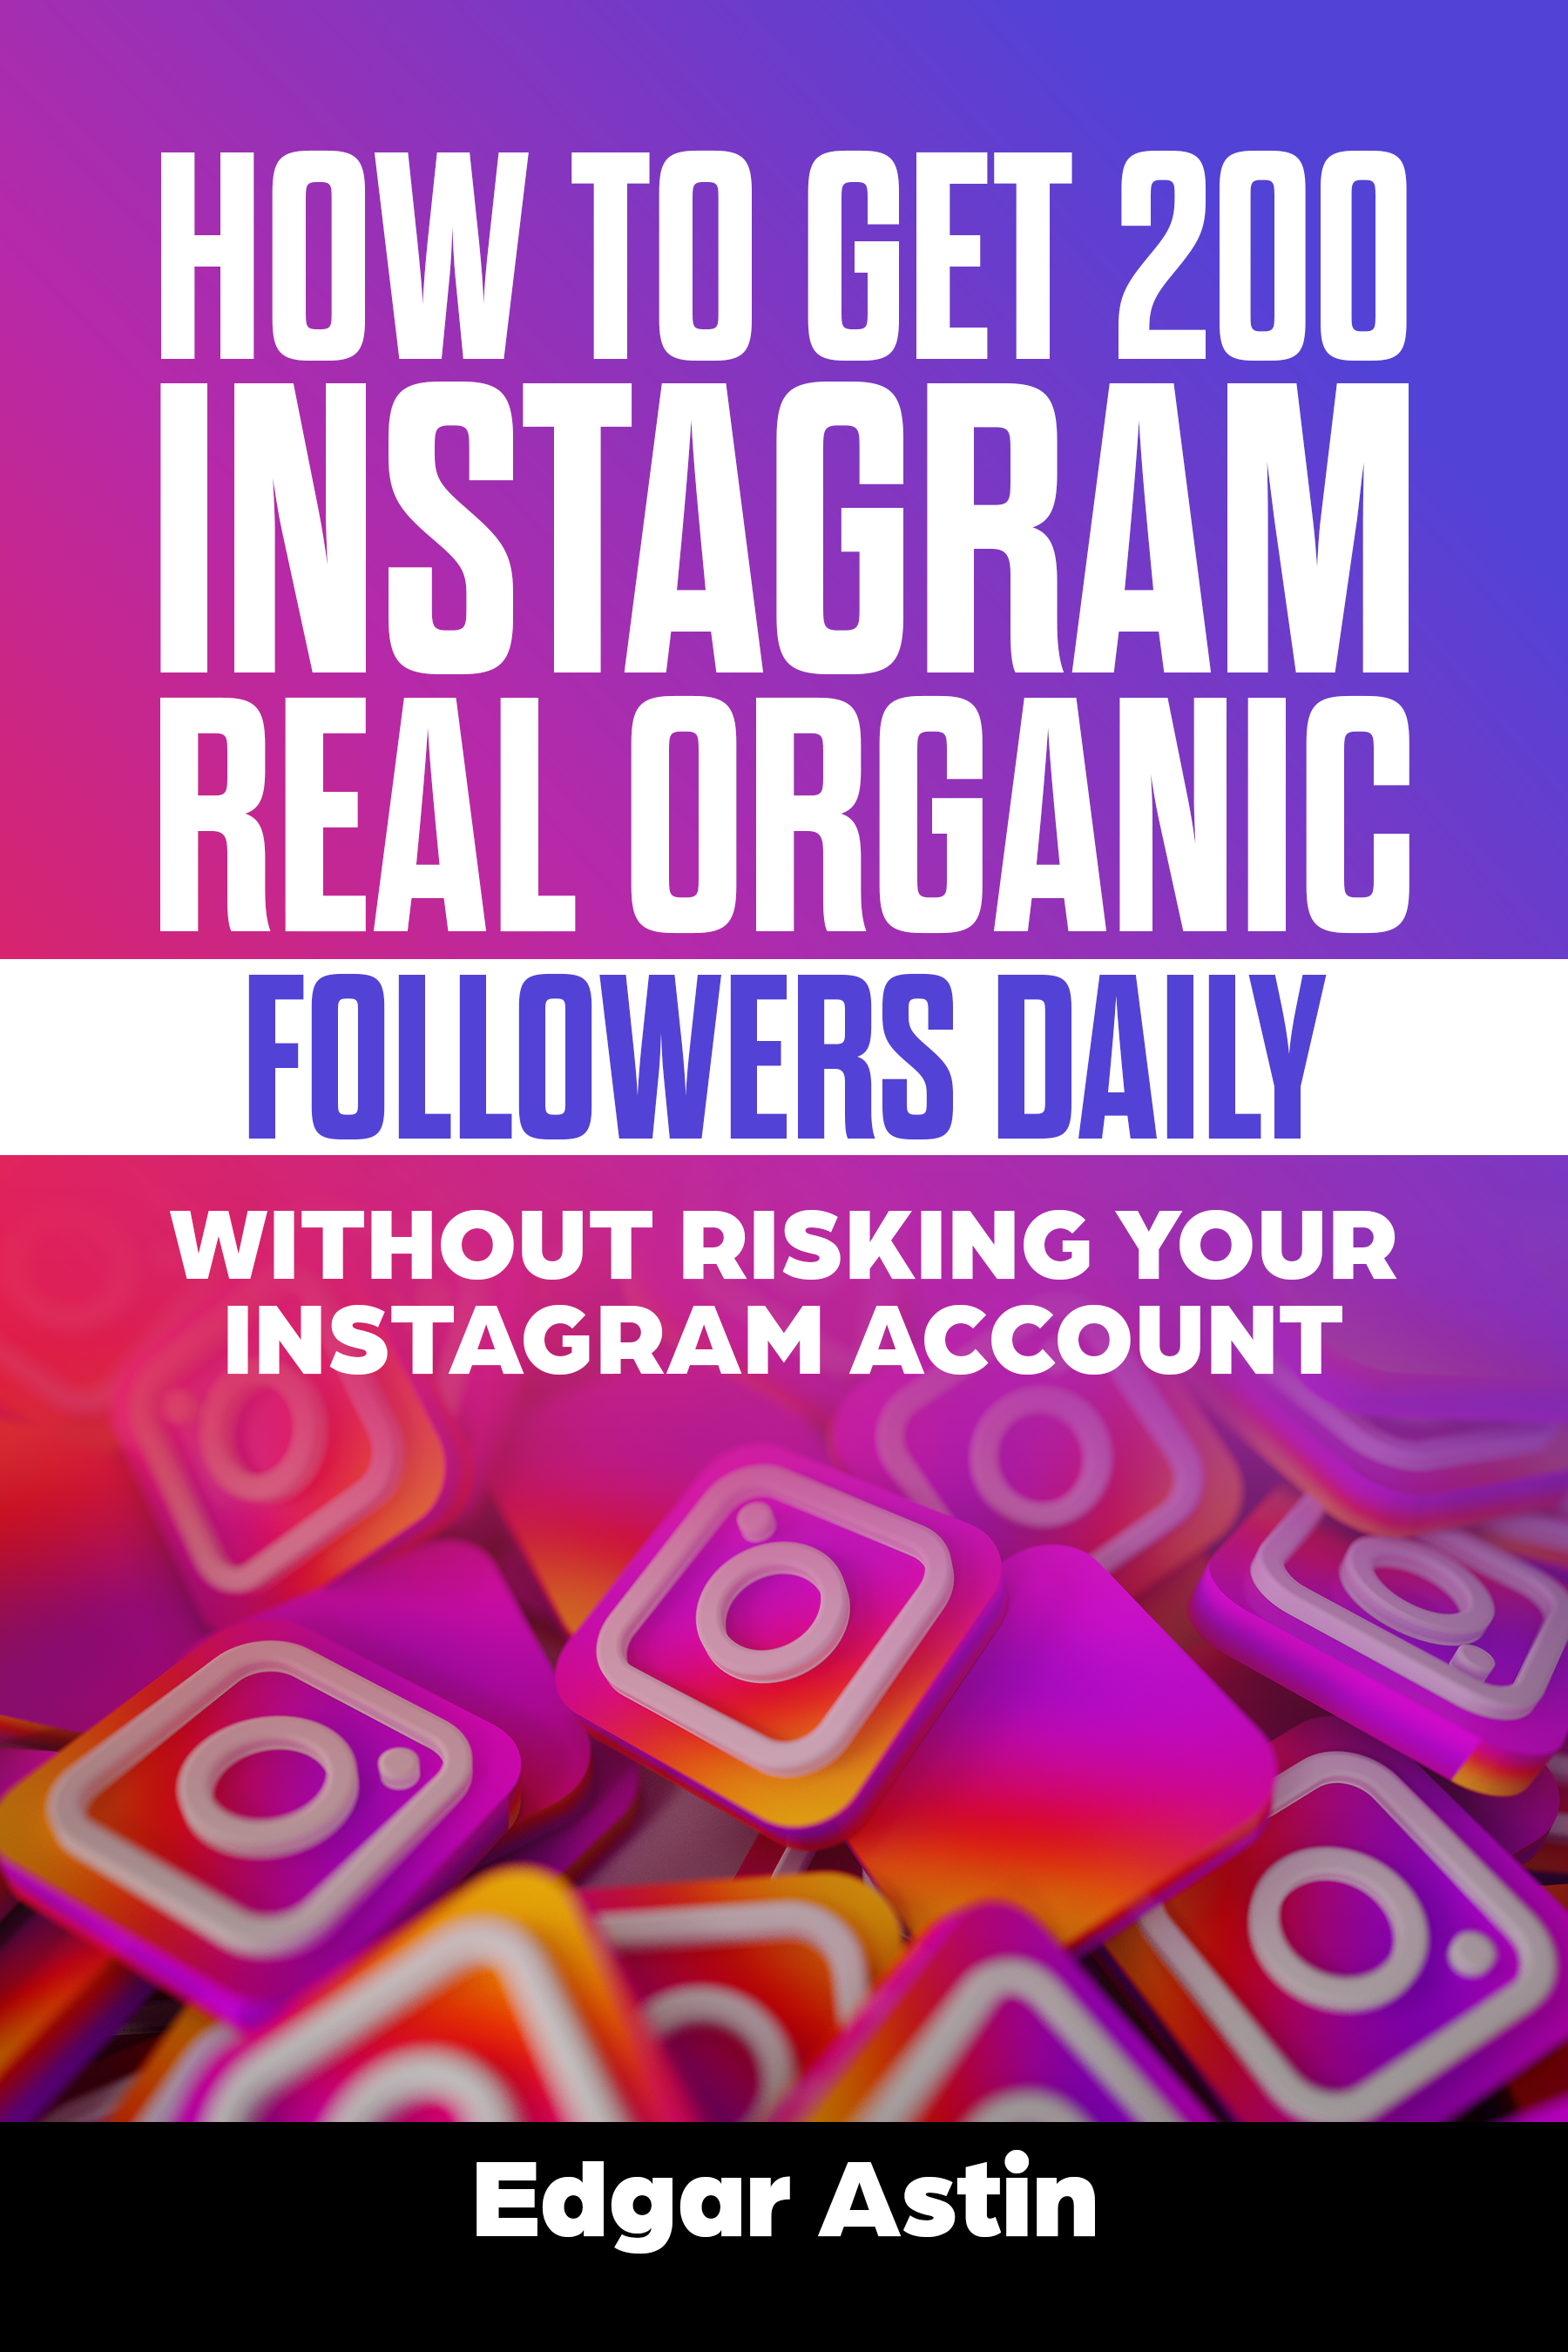 how to get 200 instagram real organic followers daily without risking your instagram account - how to get 200 followers on instagram